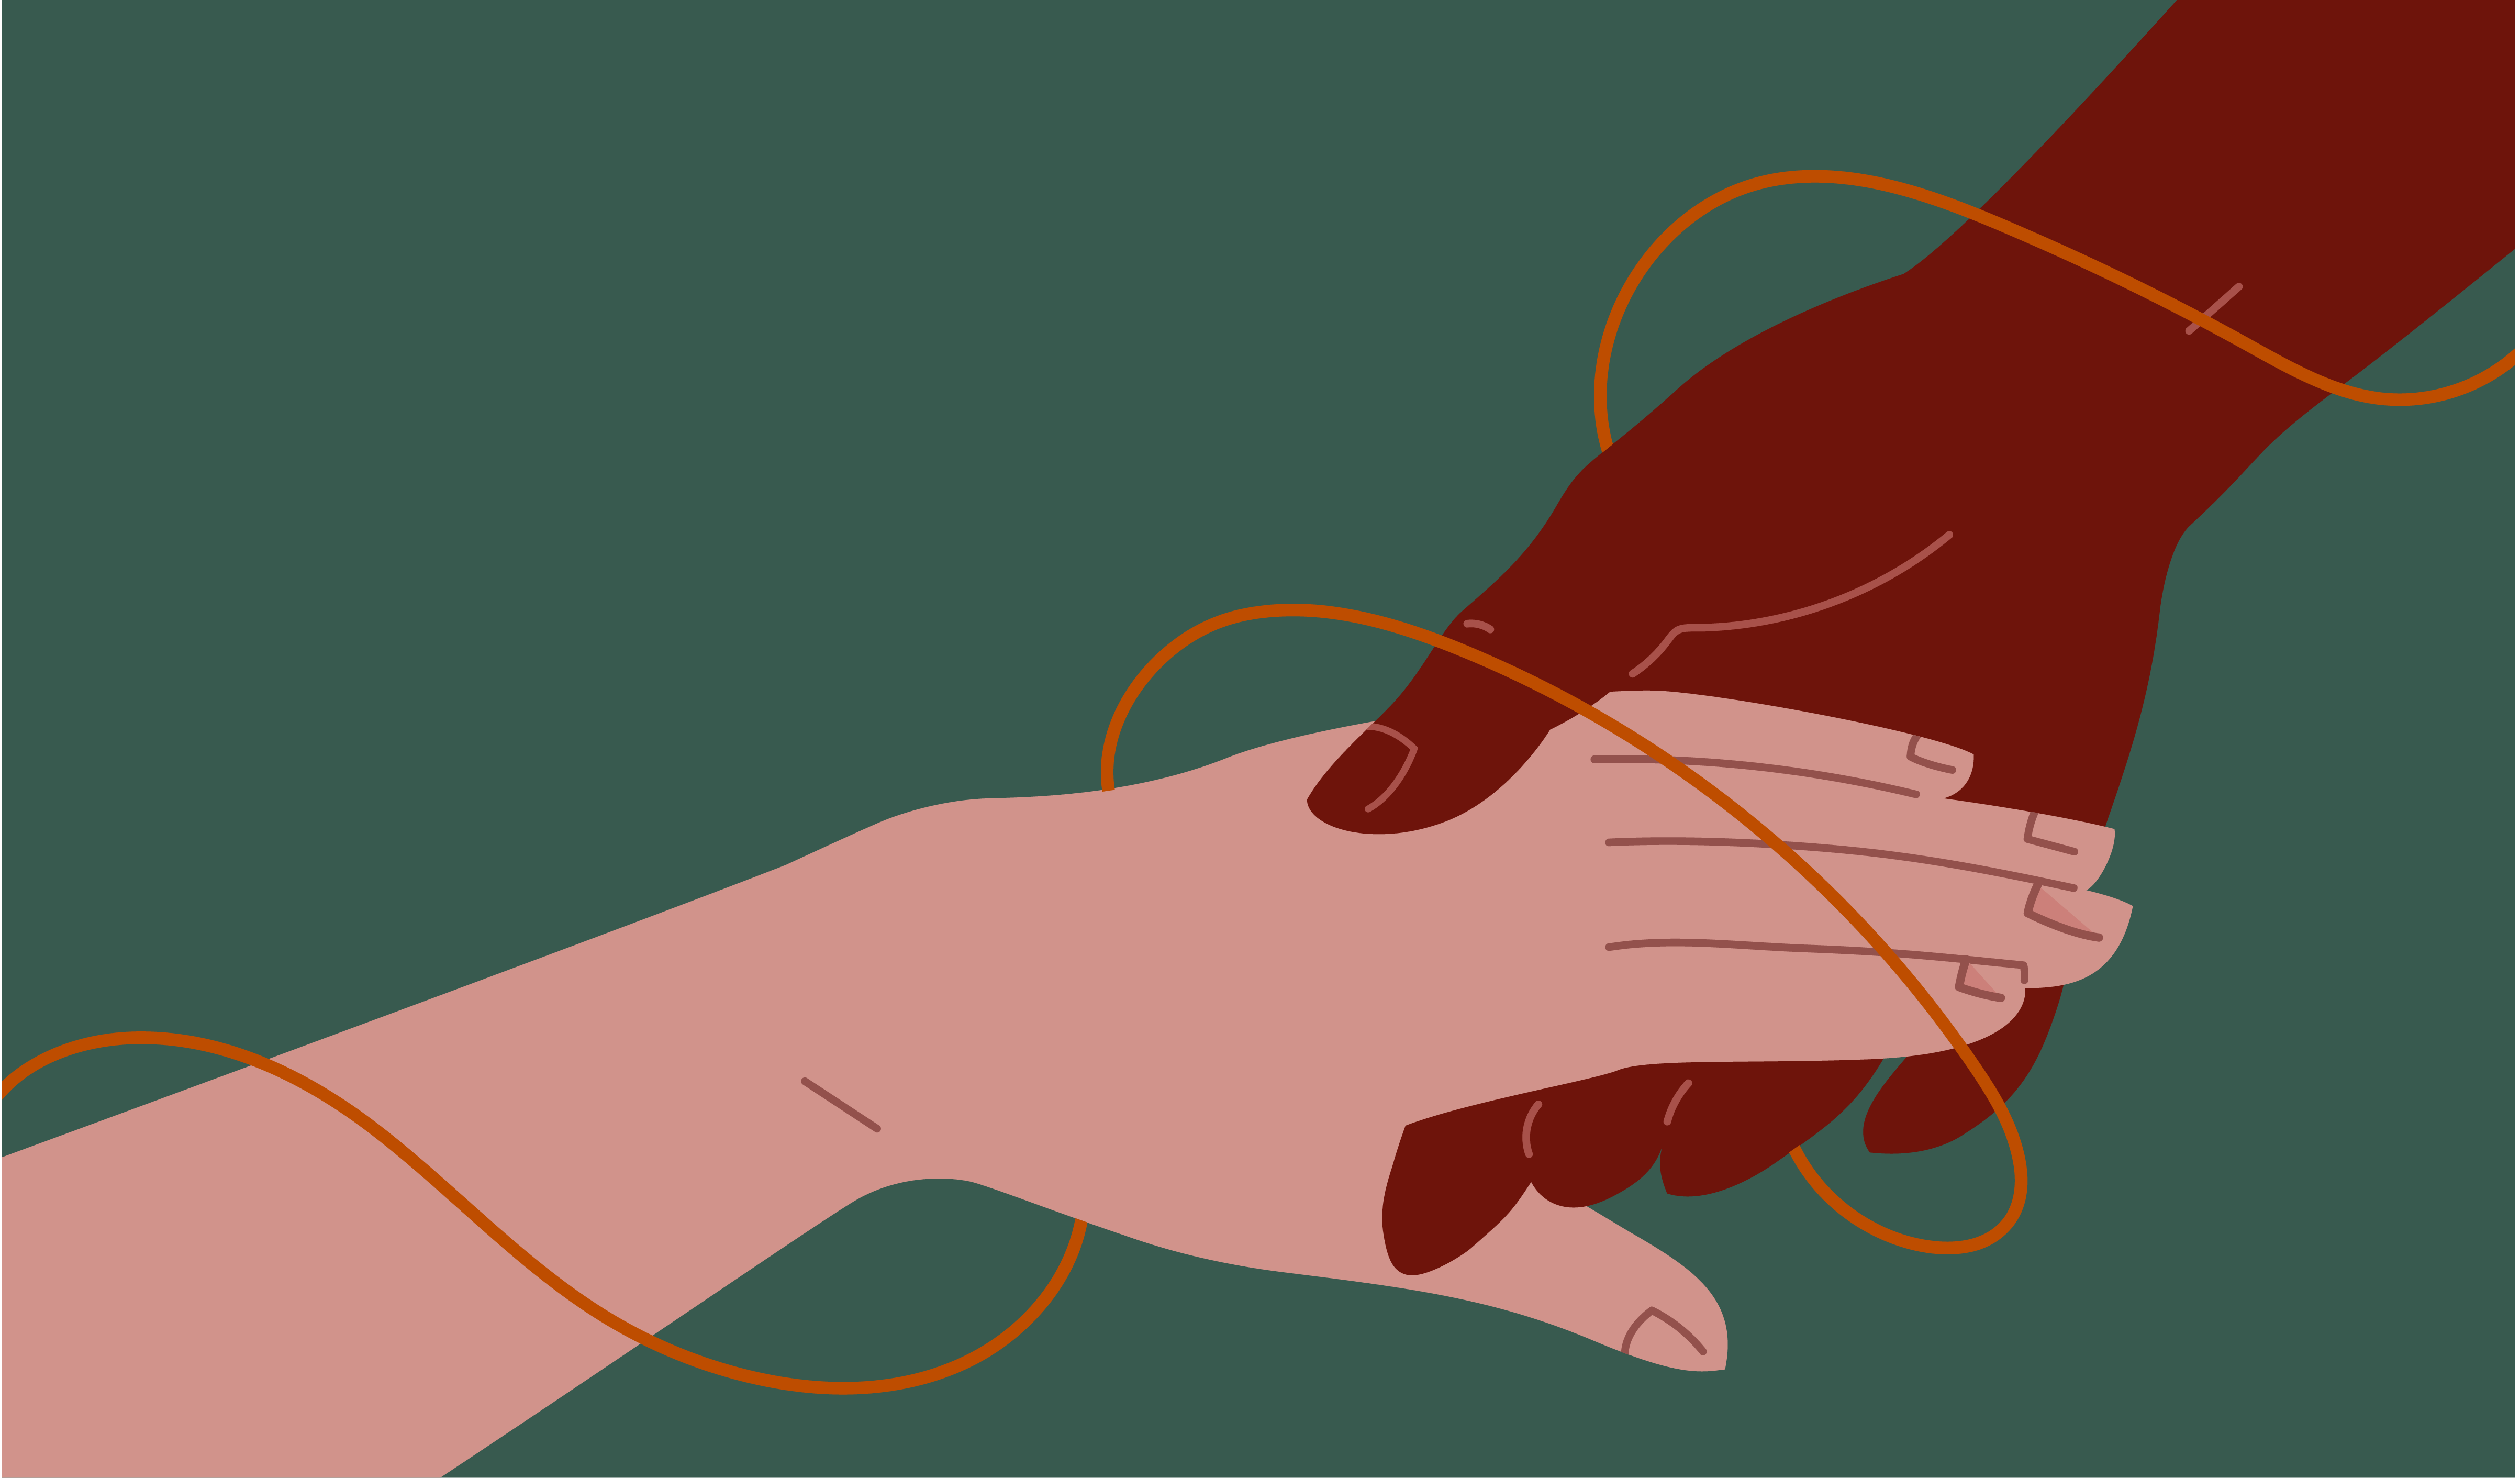 An illustration of 2 hands holding each other. A line/thread wraps around both hands.